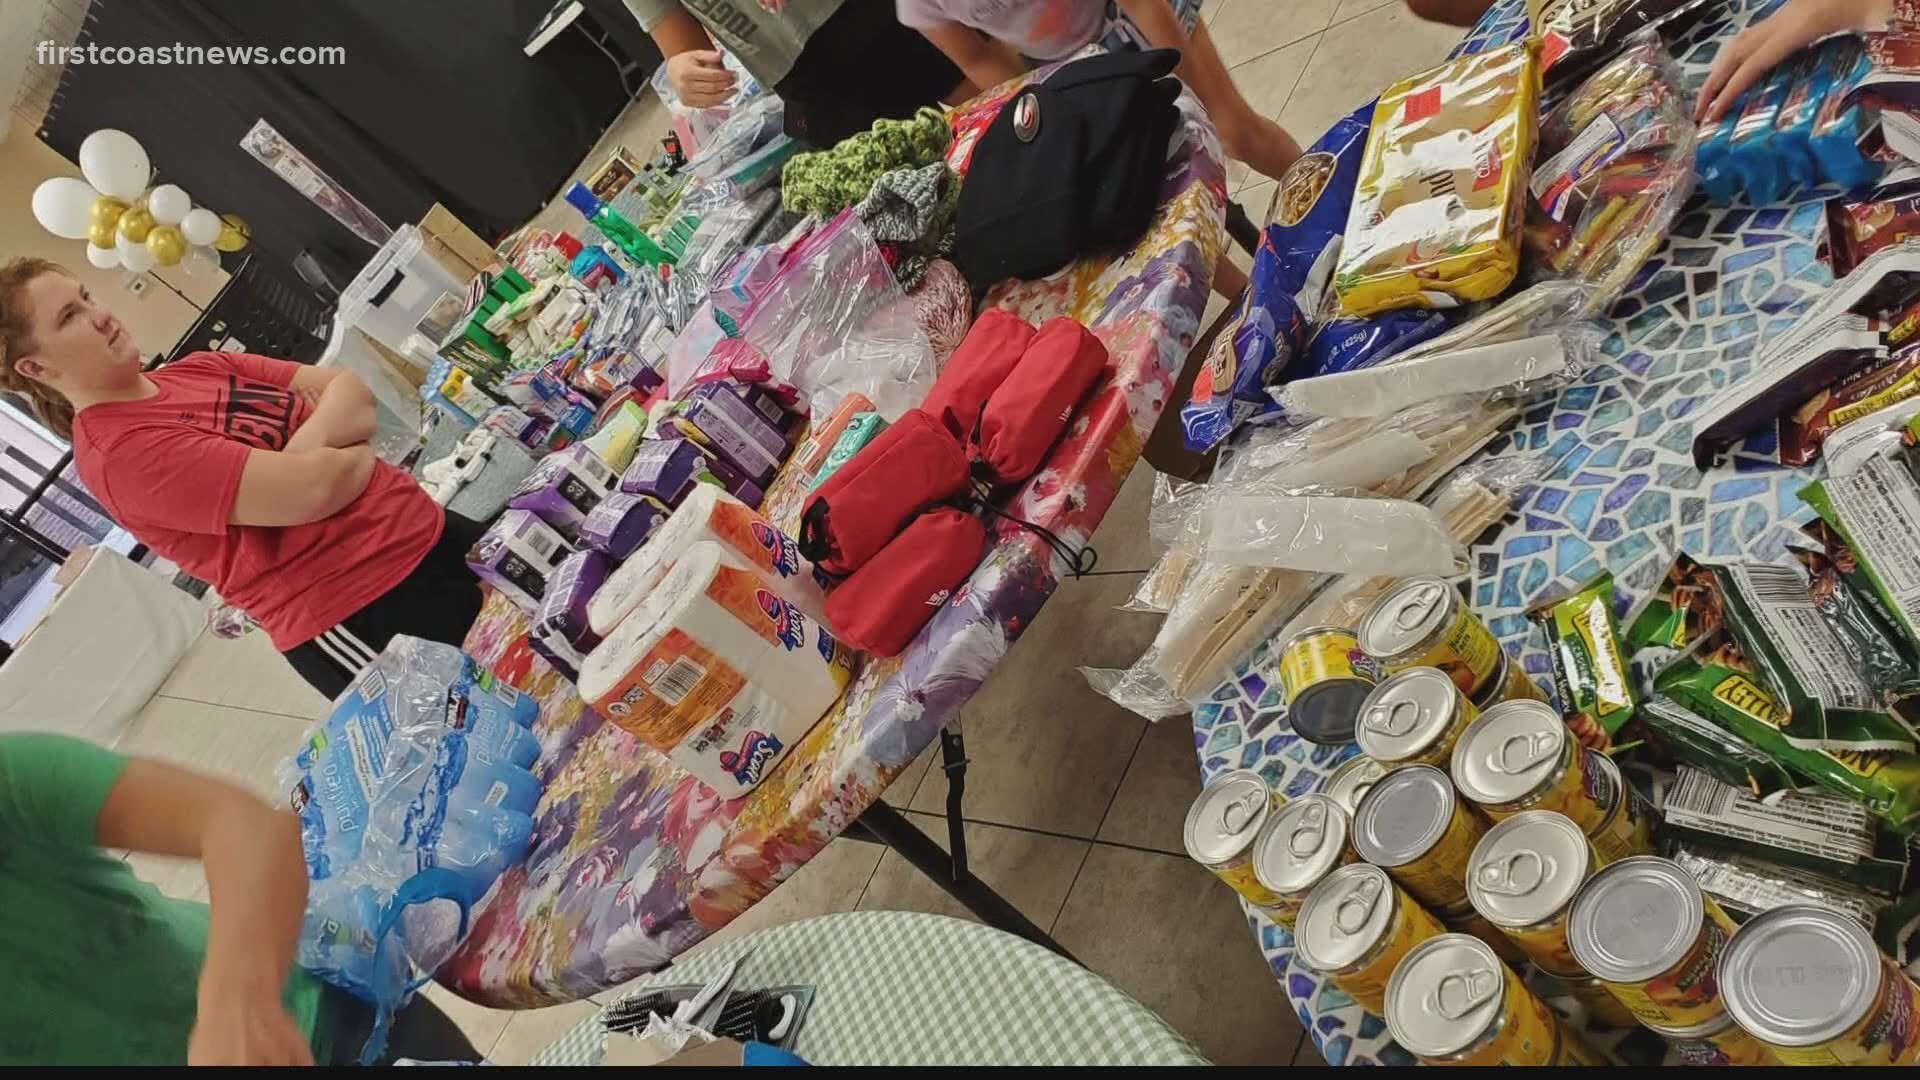 Ellie Oneal organized a drive for supplies like hygiene products and food to donate to homeless people in need.